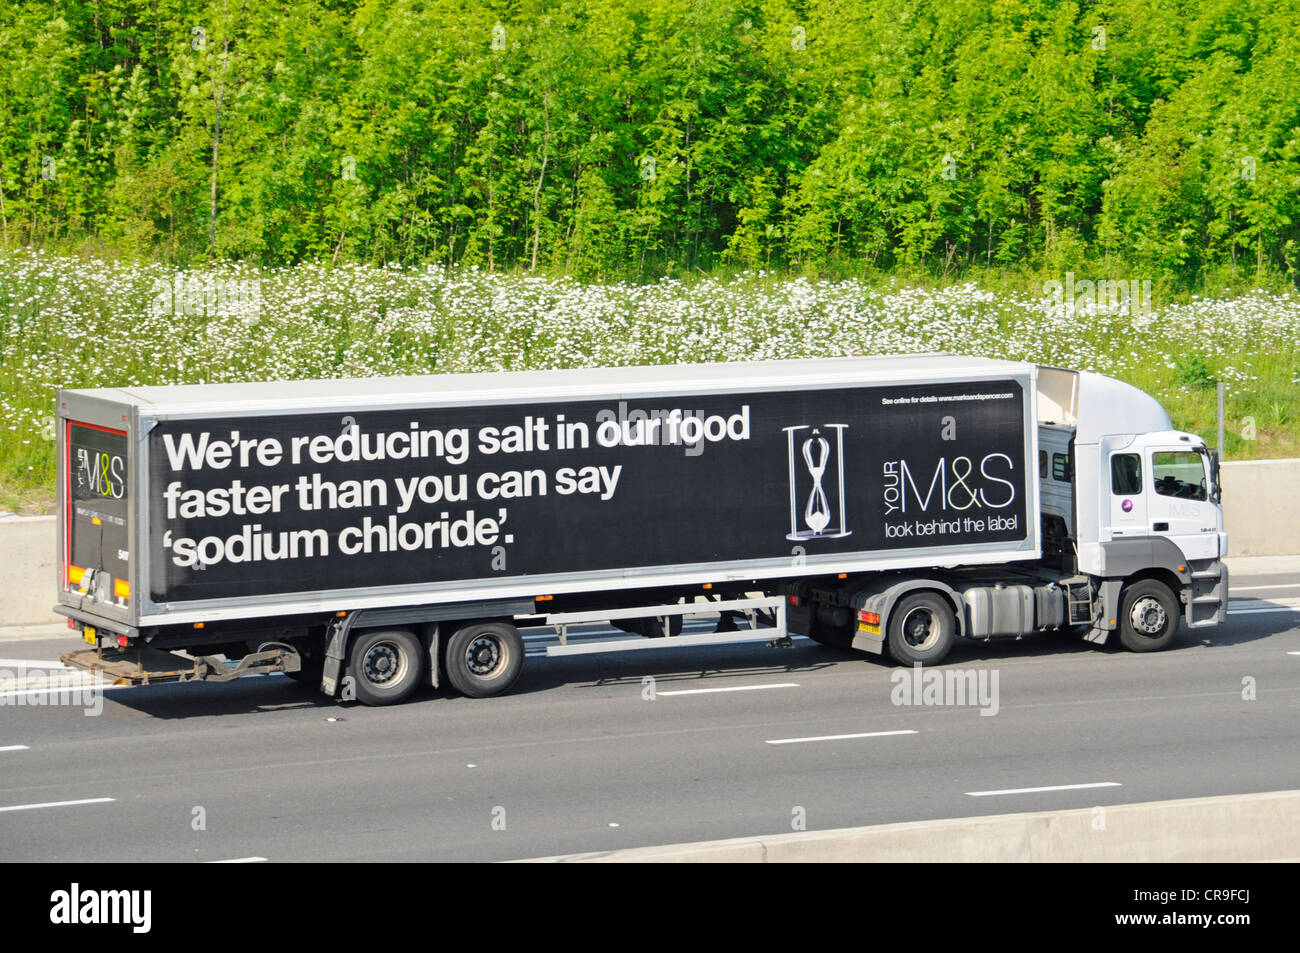 M&S delivery lorry and trailer with slogan promoting salt reduction in food Stock Photo